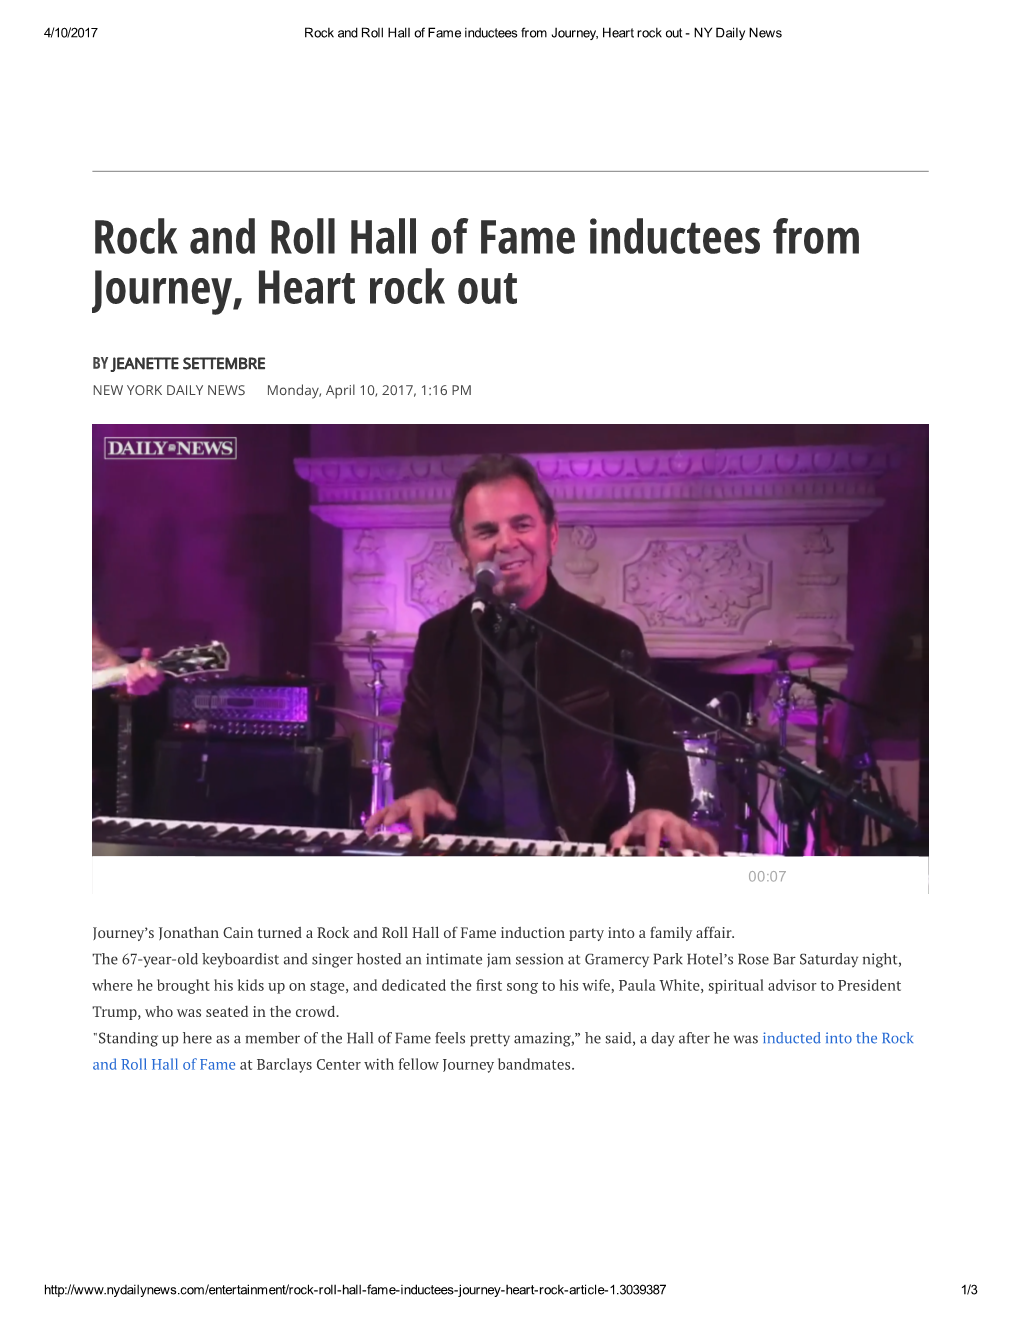 Rock and Roll Hall of Fame Inductees from Journey, Heart Rock out ­ NY Daily News